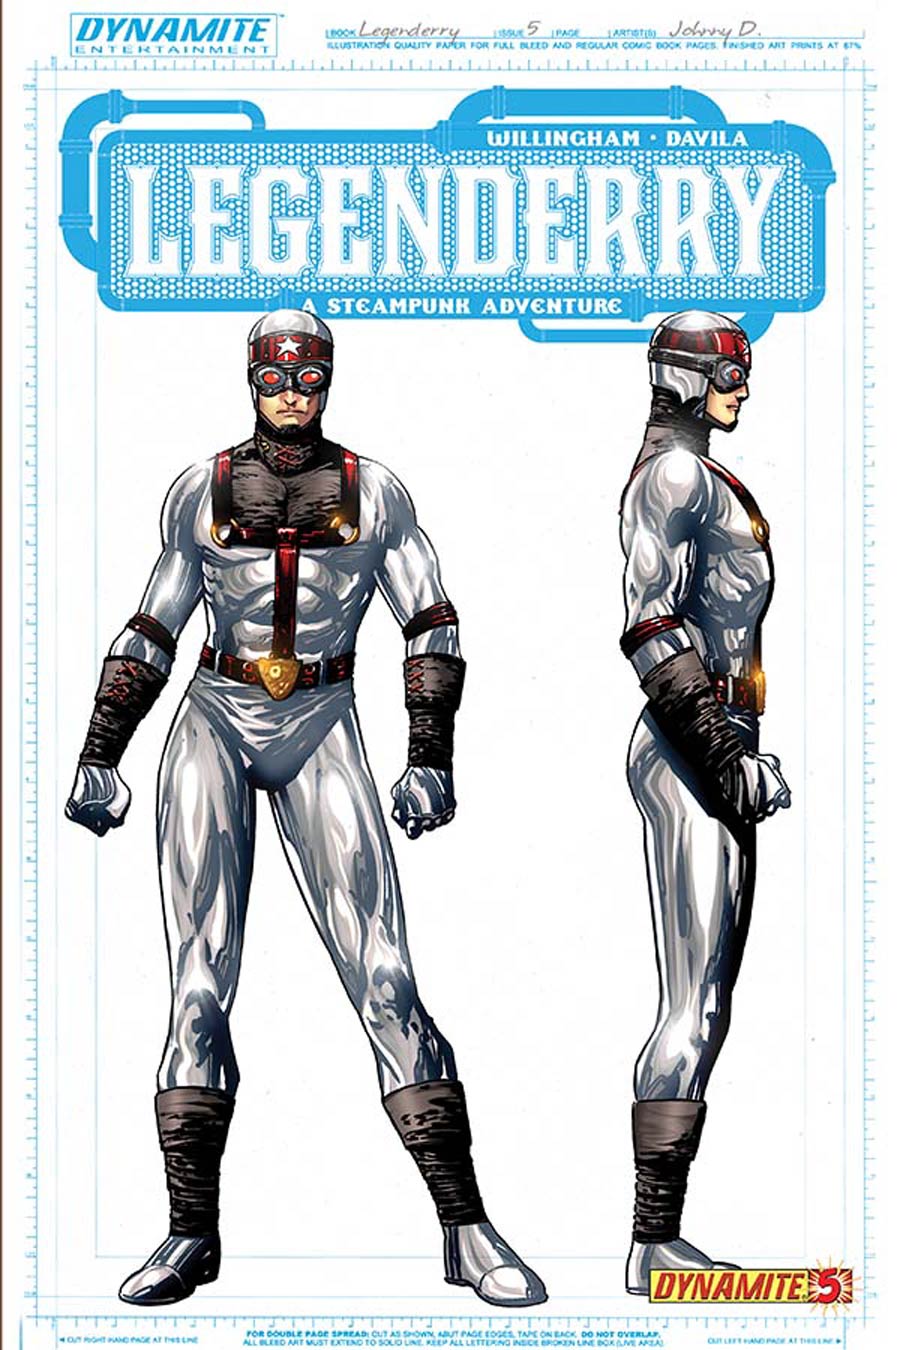 Legenderry A Steampunk Adventure #5 Cover C Incentive Silver Star Concept Art Variant Cover